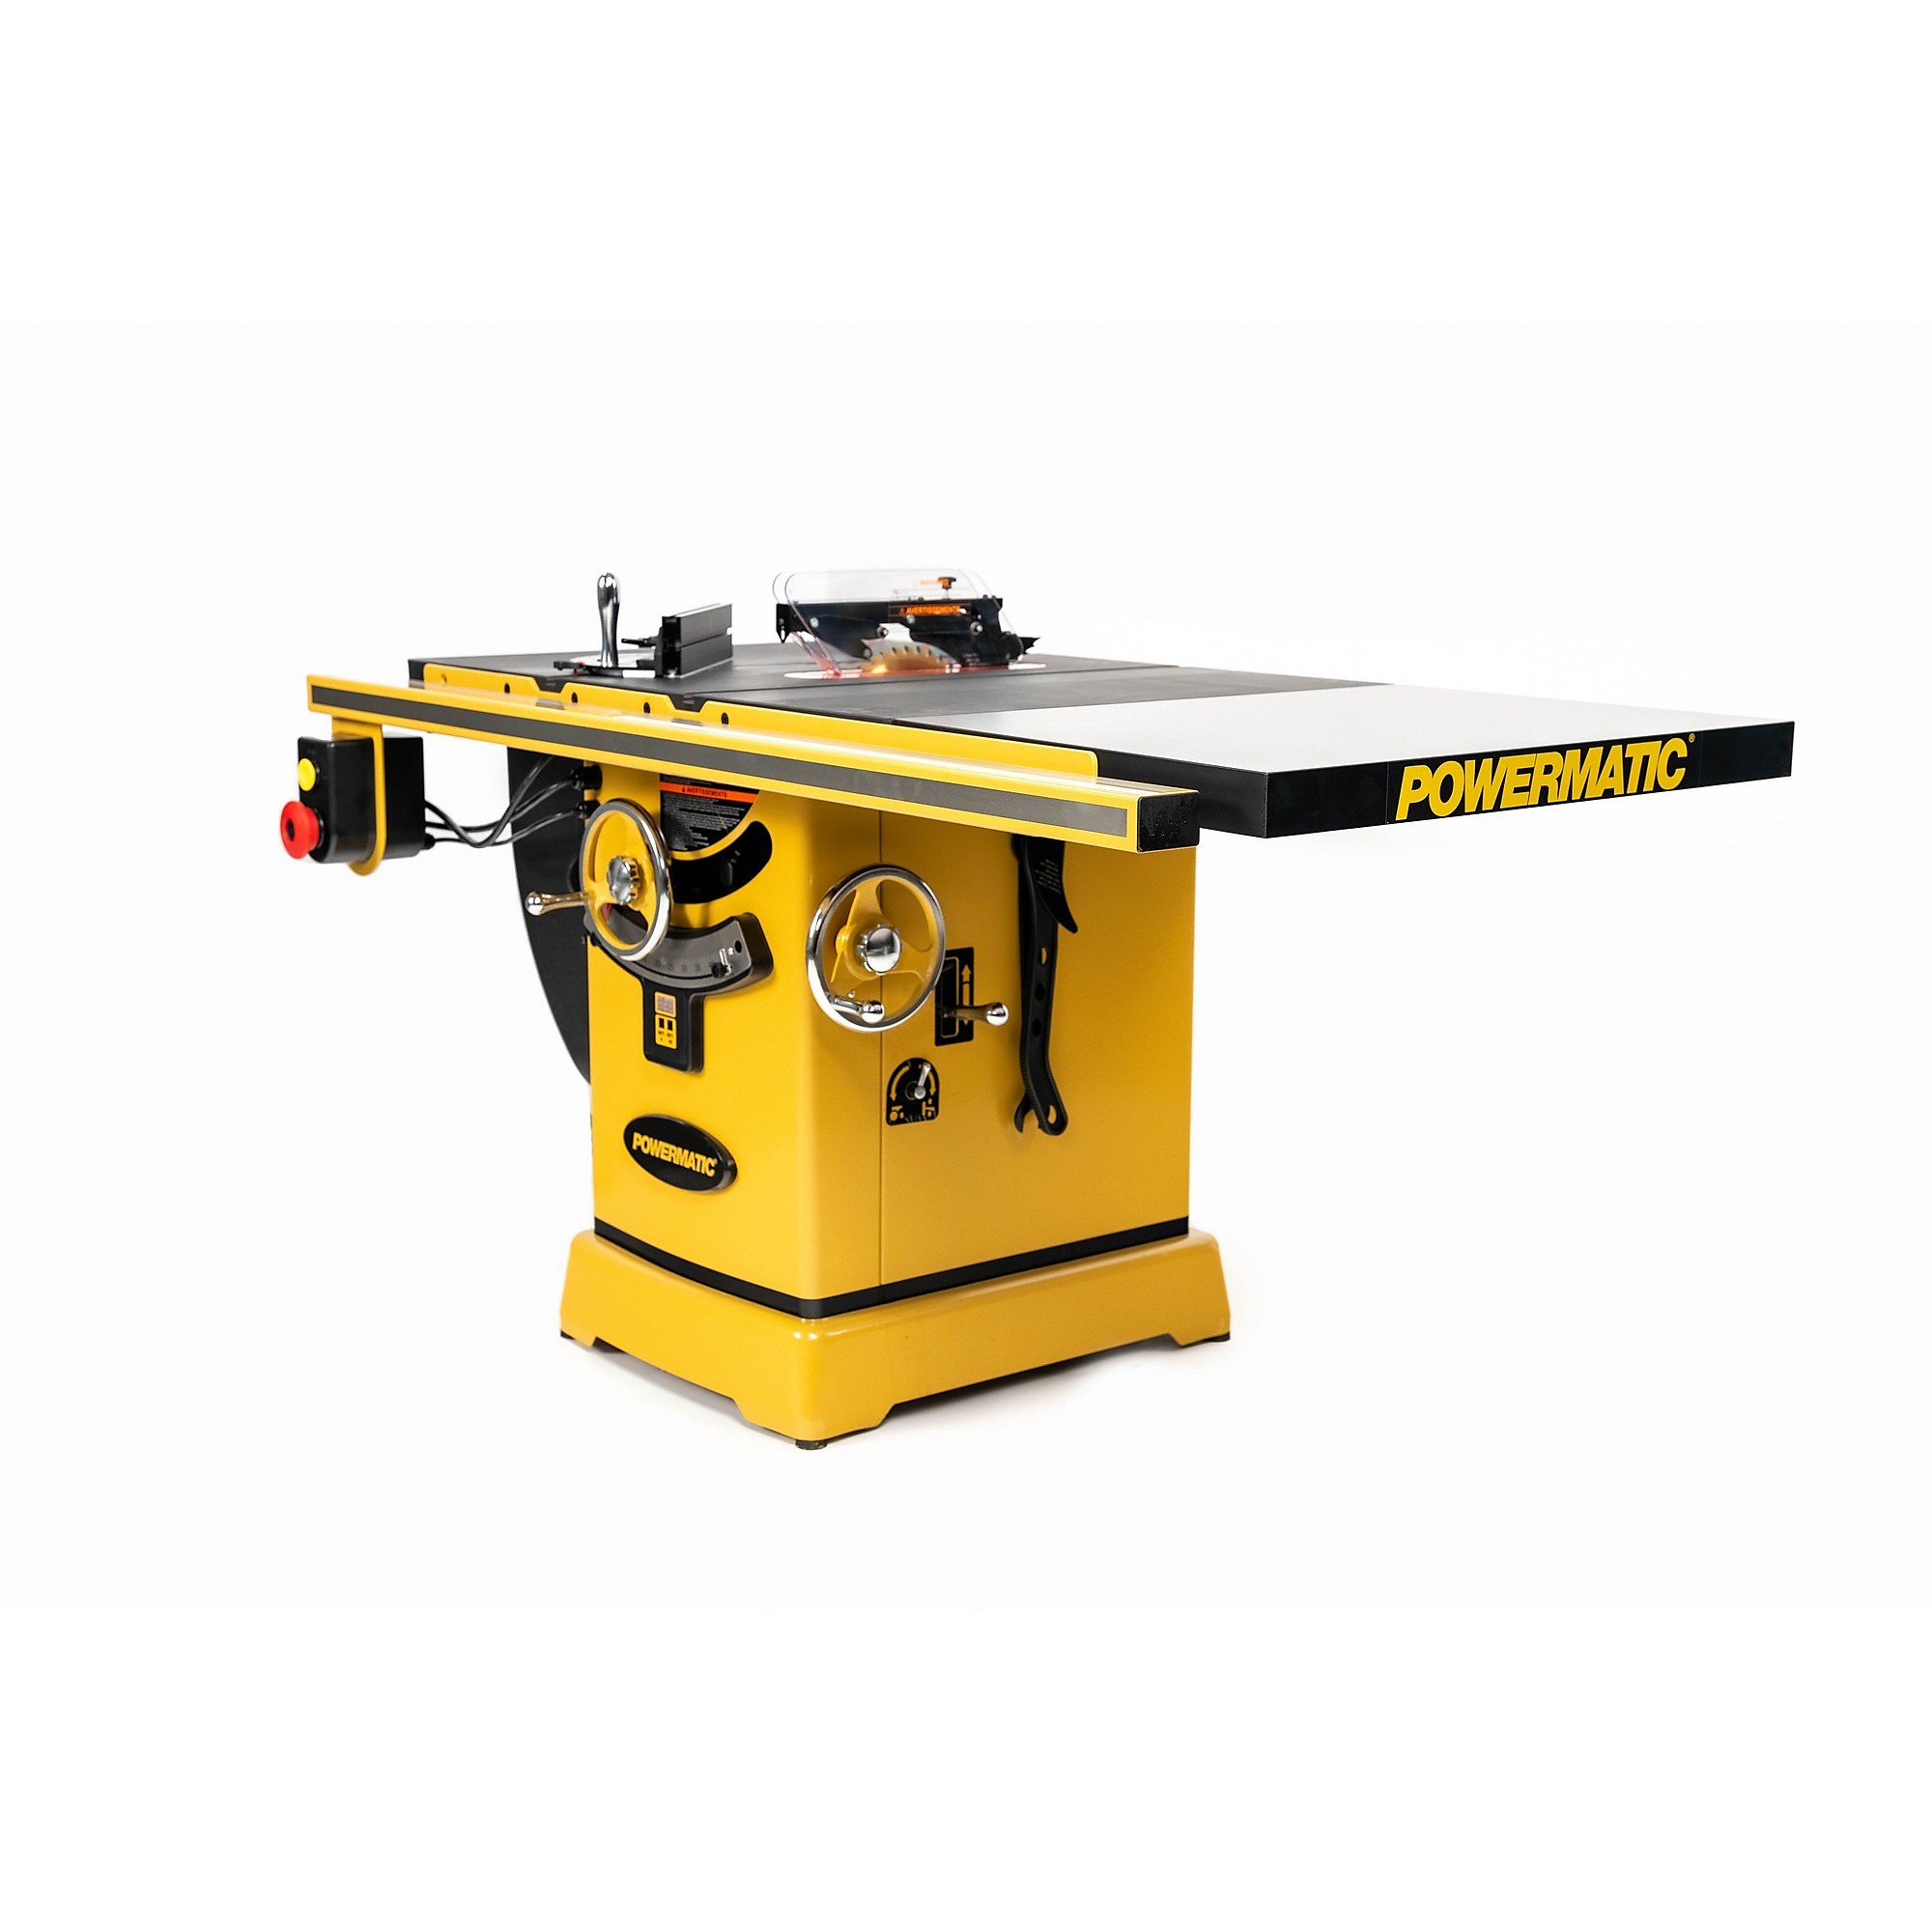 Powermatic, ArmorGlide Table Saw, Blade Diameter 10 Horsepower 7.5 HP, Volts 460 Model PM3000T